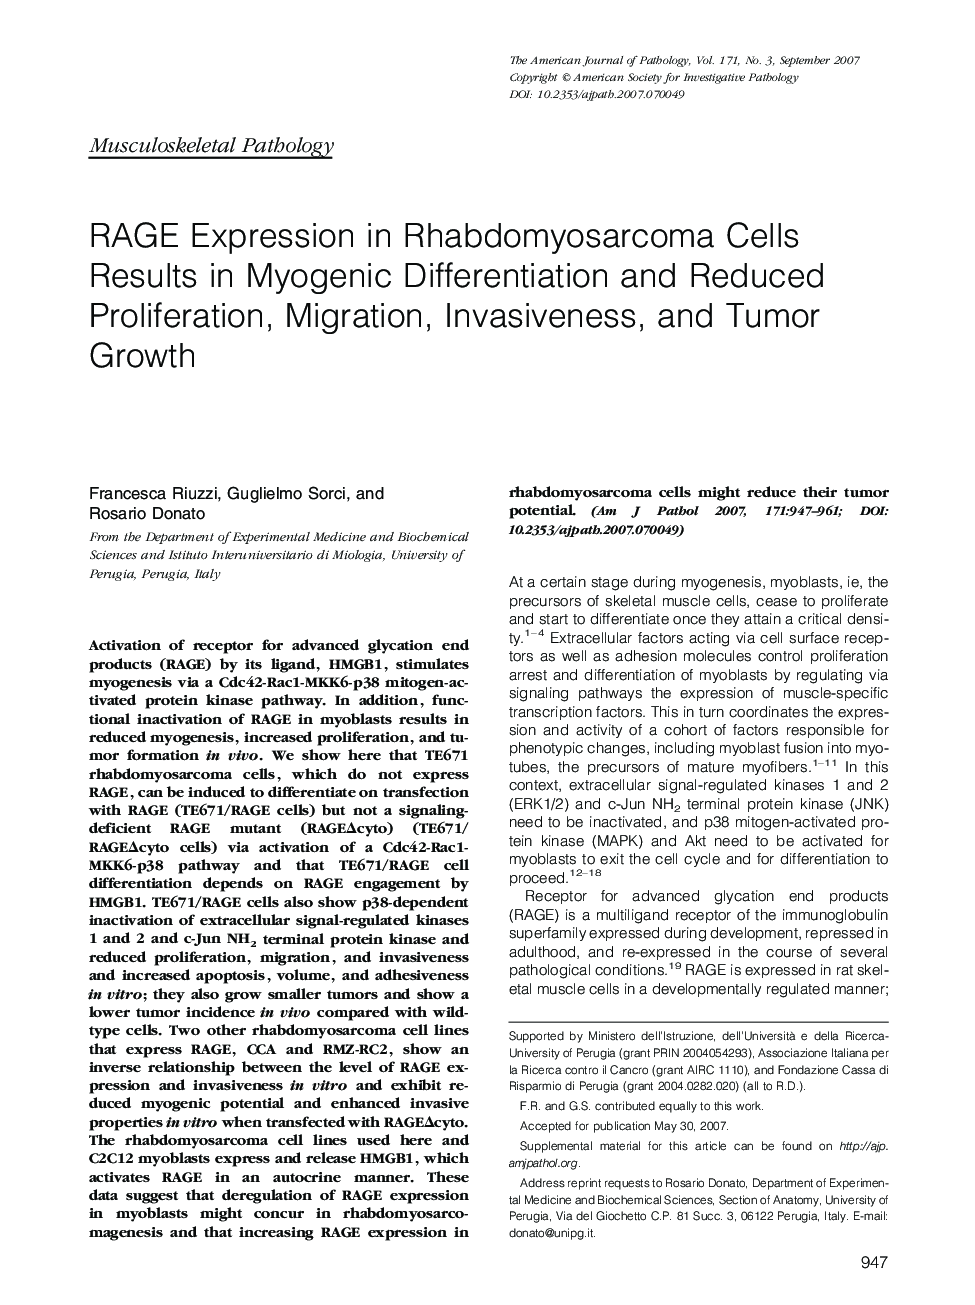 RAGE Expression in Rhabdomyosarcoma Cells Results in Myogenic Differentiation and Reduced Proliferation, Migration, Invasiveness, and Tumor Growth